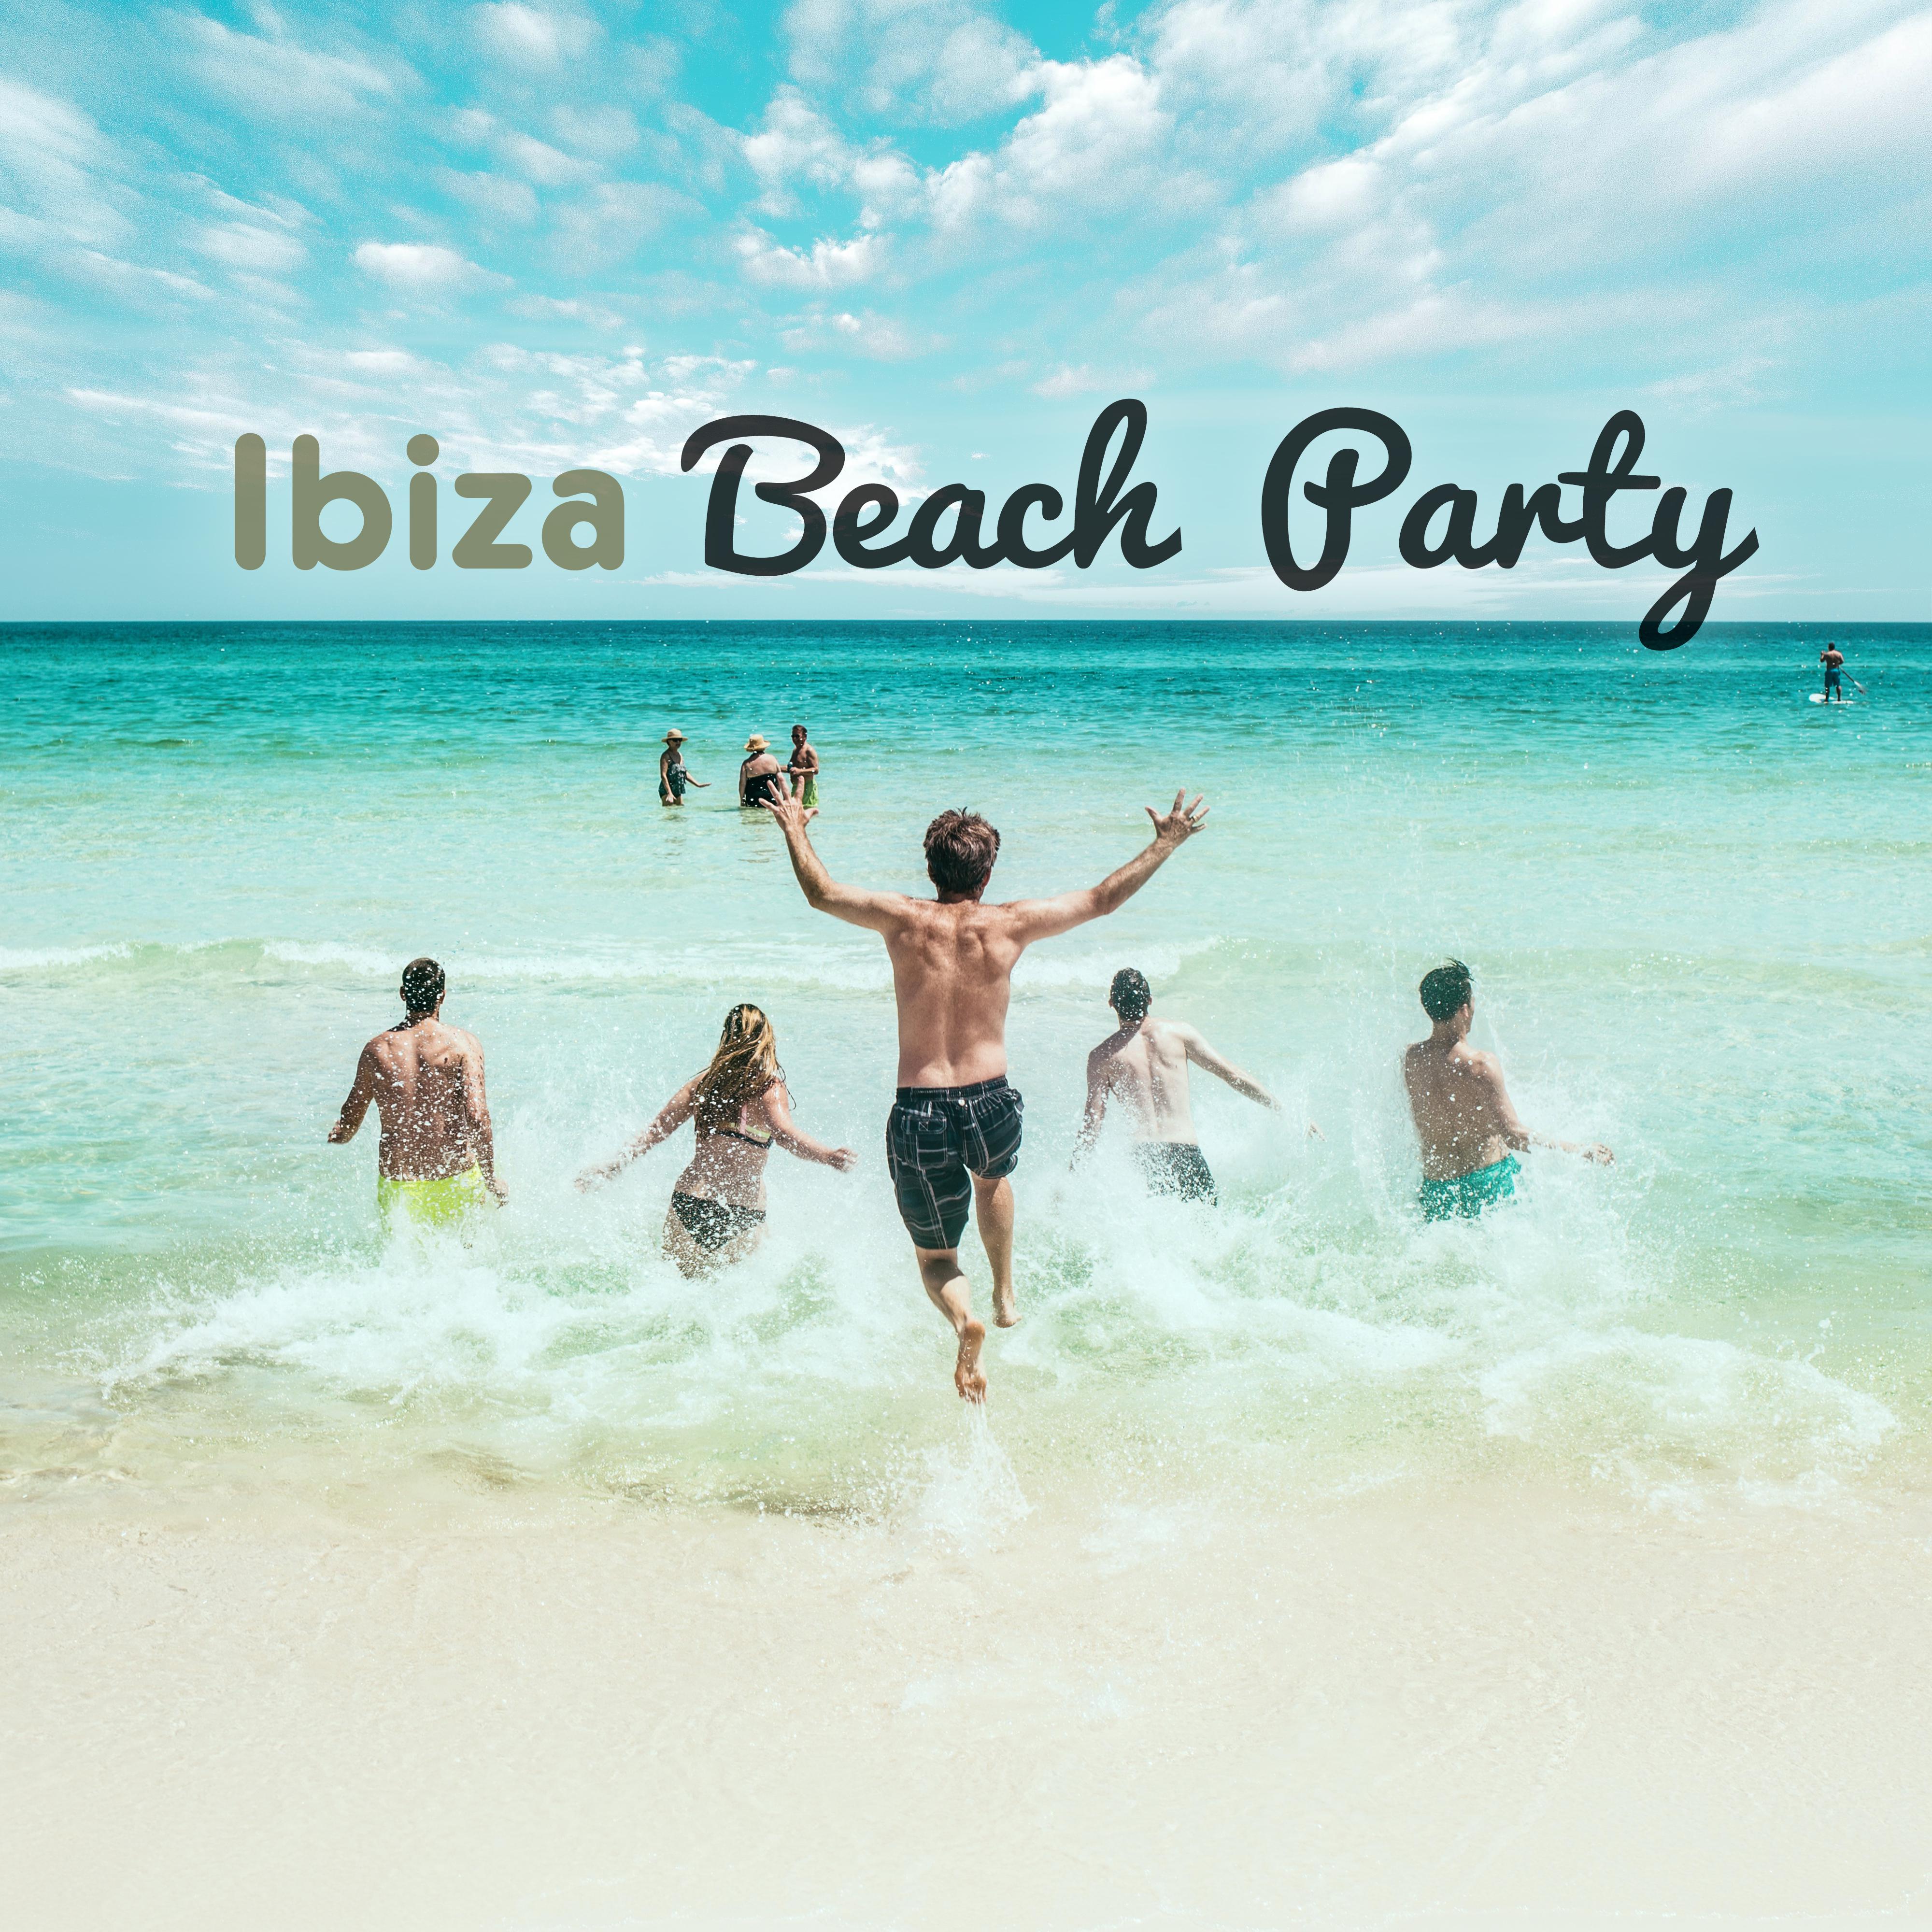 Ibiza Beach Party – Best Chill Out Vibes, Hot Music, Summer Hits, Sand & Sun, Drinks Bar